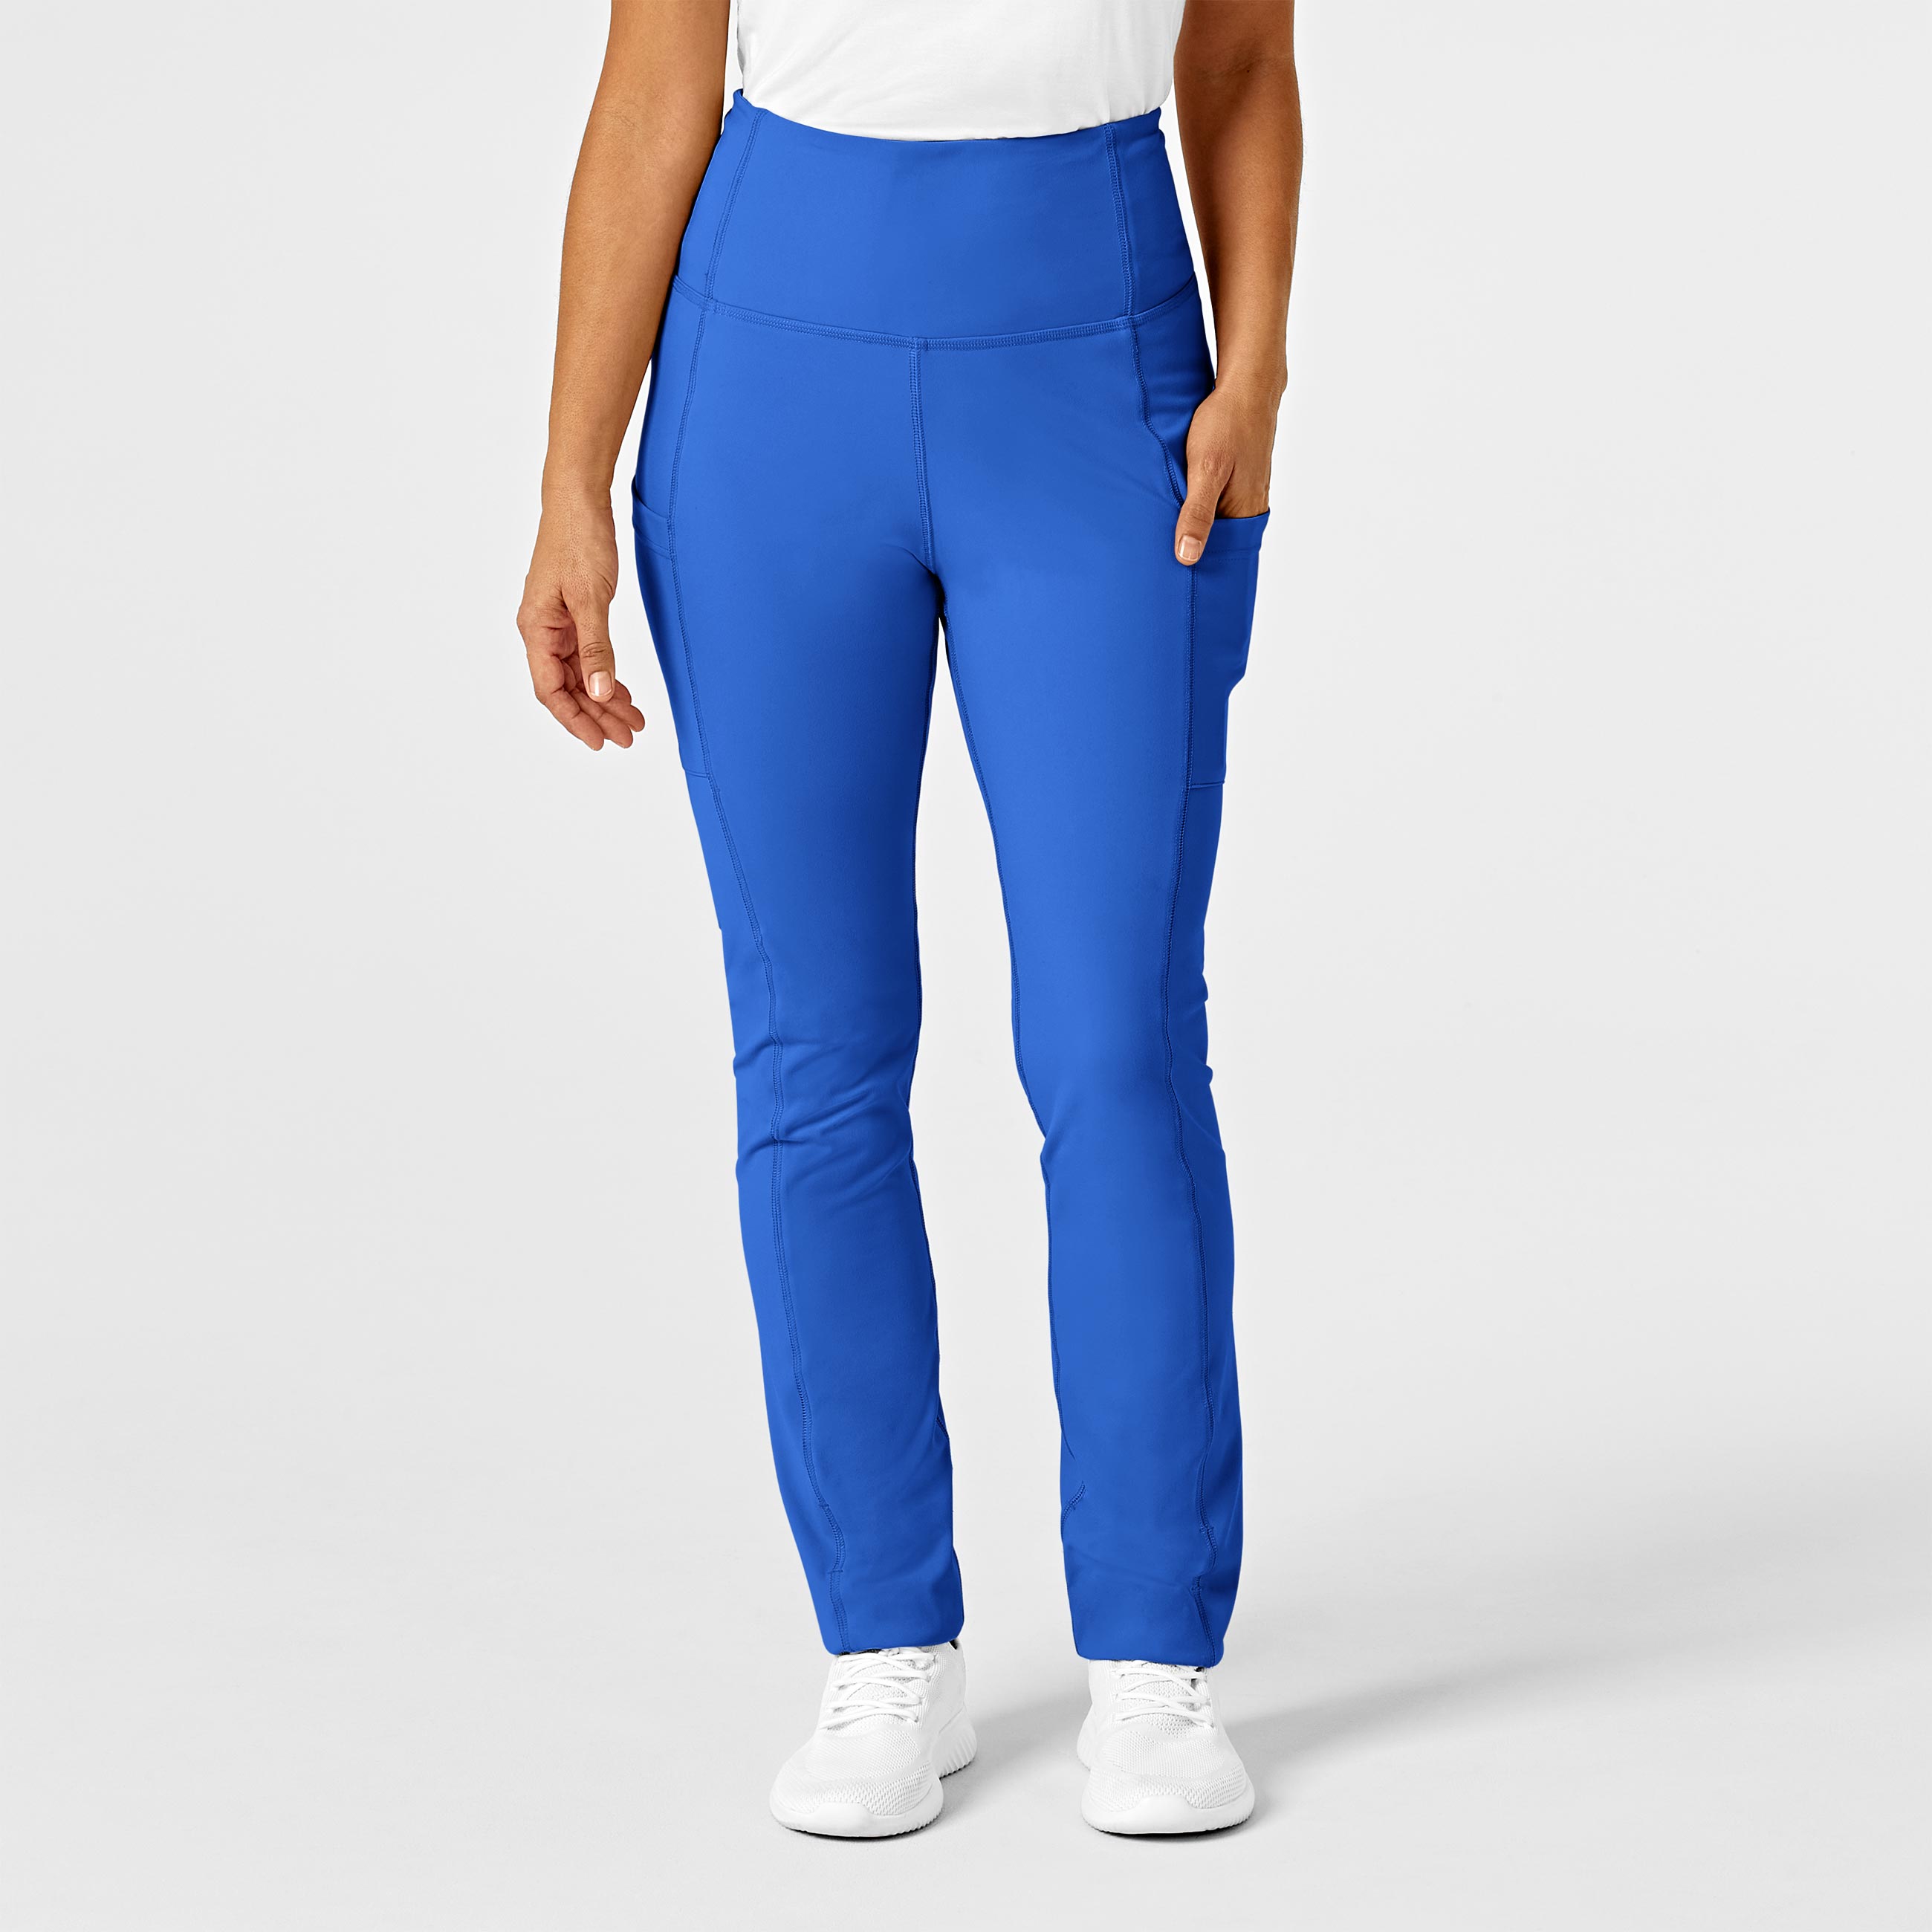 Cotton Viscose Straight Pants-Imperial Blue